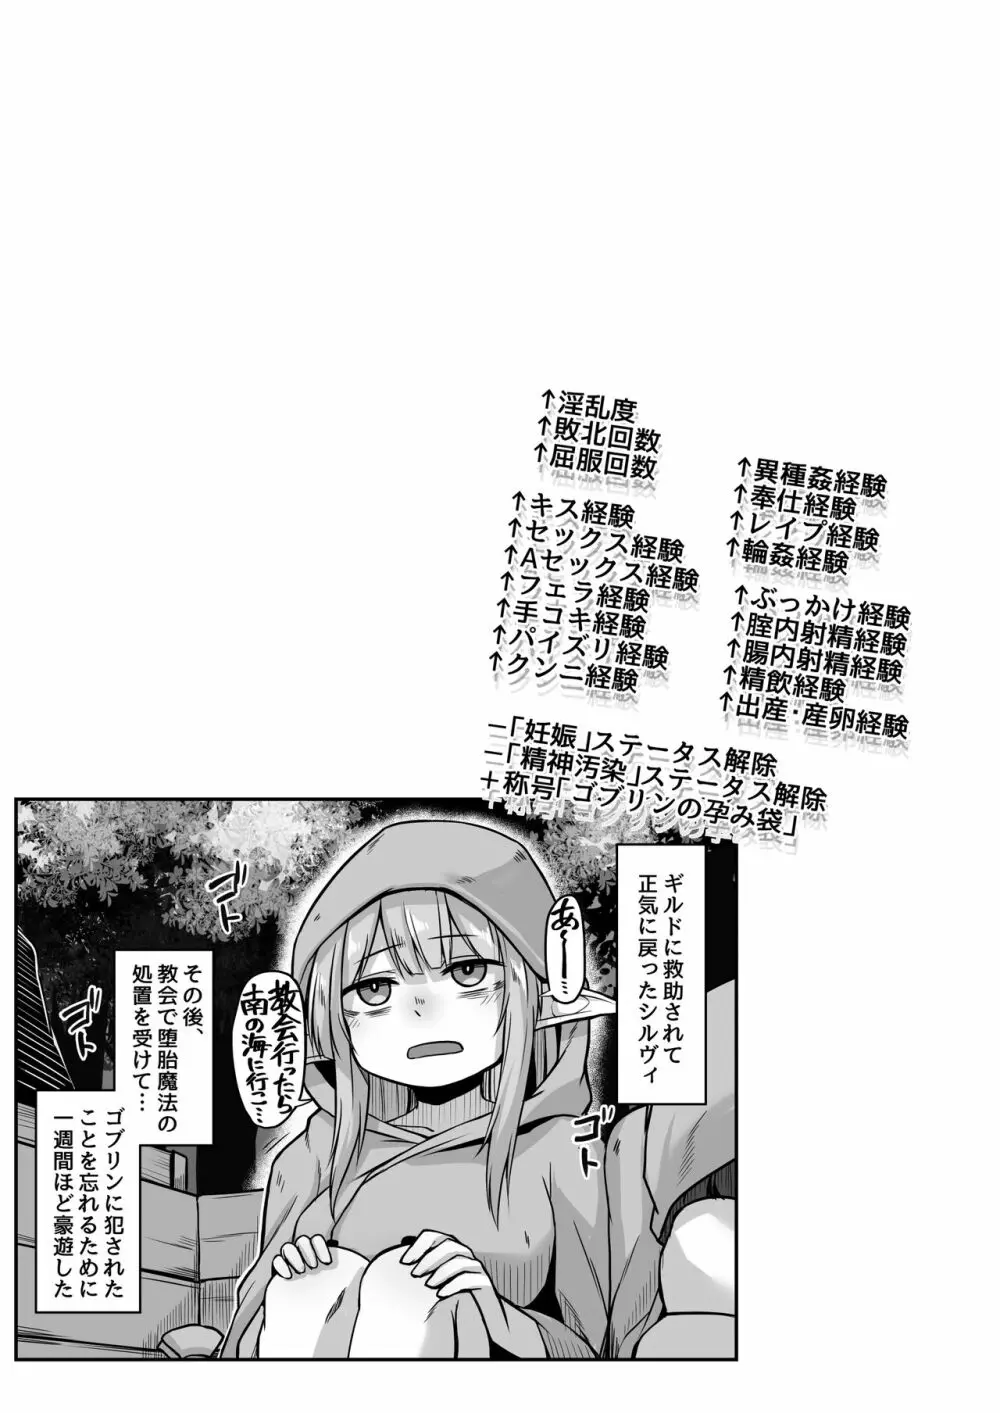 ELFIN QUEST #ゴブリン敗北編 Page.34